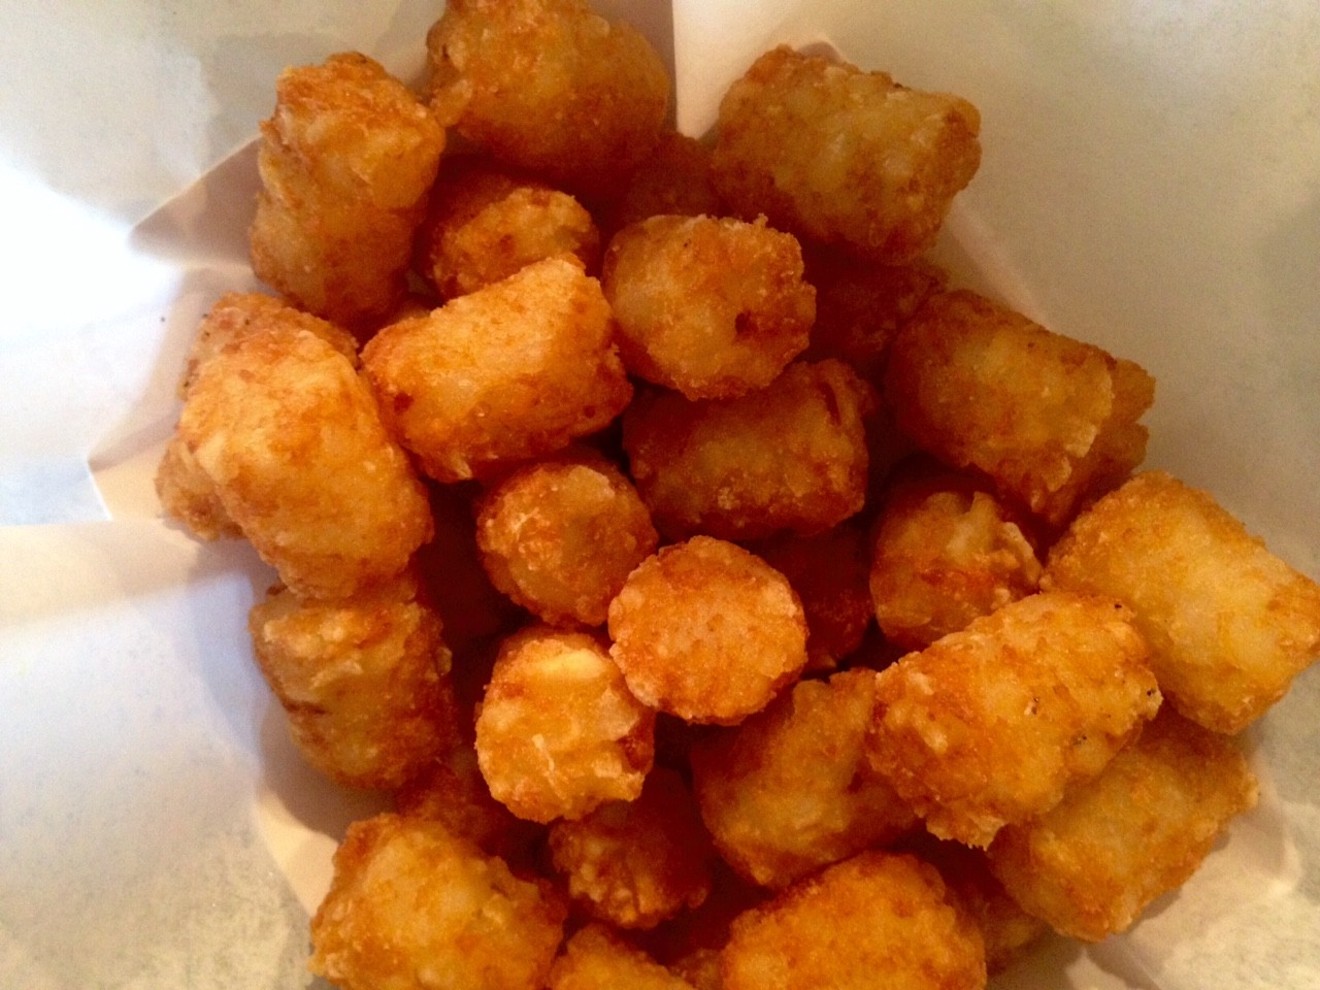 Please don't let anyone I love see me eat the tater tots at Maple and Motor ($2.70).